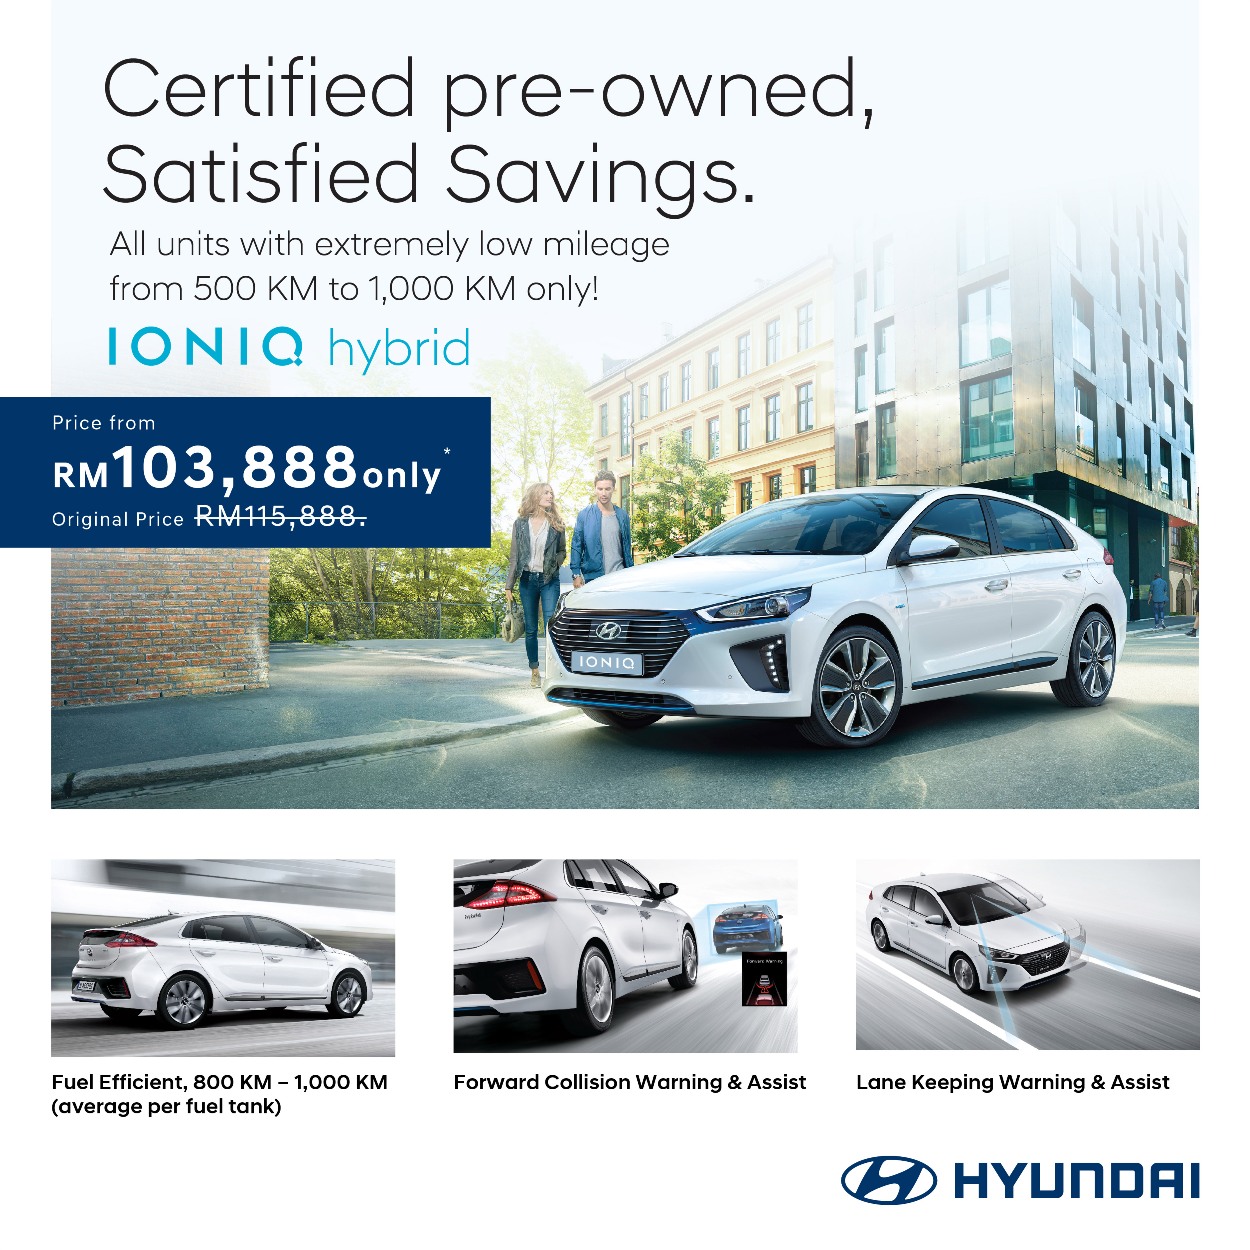 Hyundai Certified pre-owned, Satisfied Savings. All units with extremely low mileage from 500 KM to 1,000 KM only!